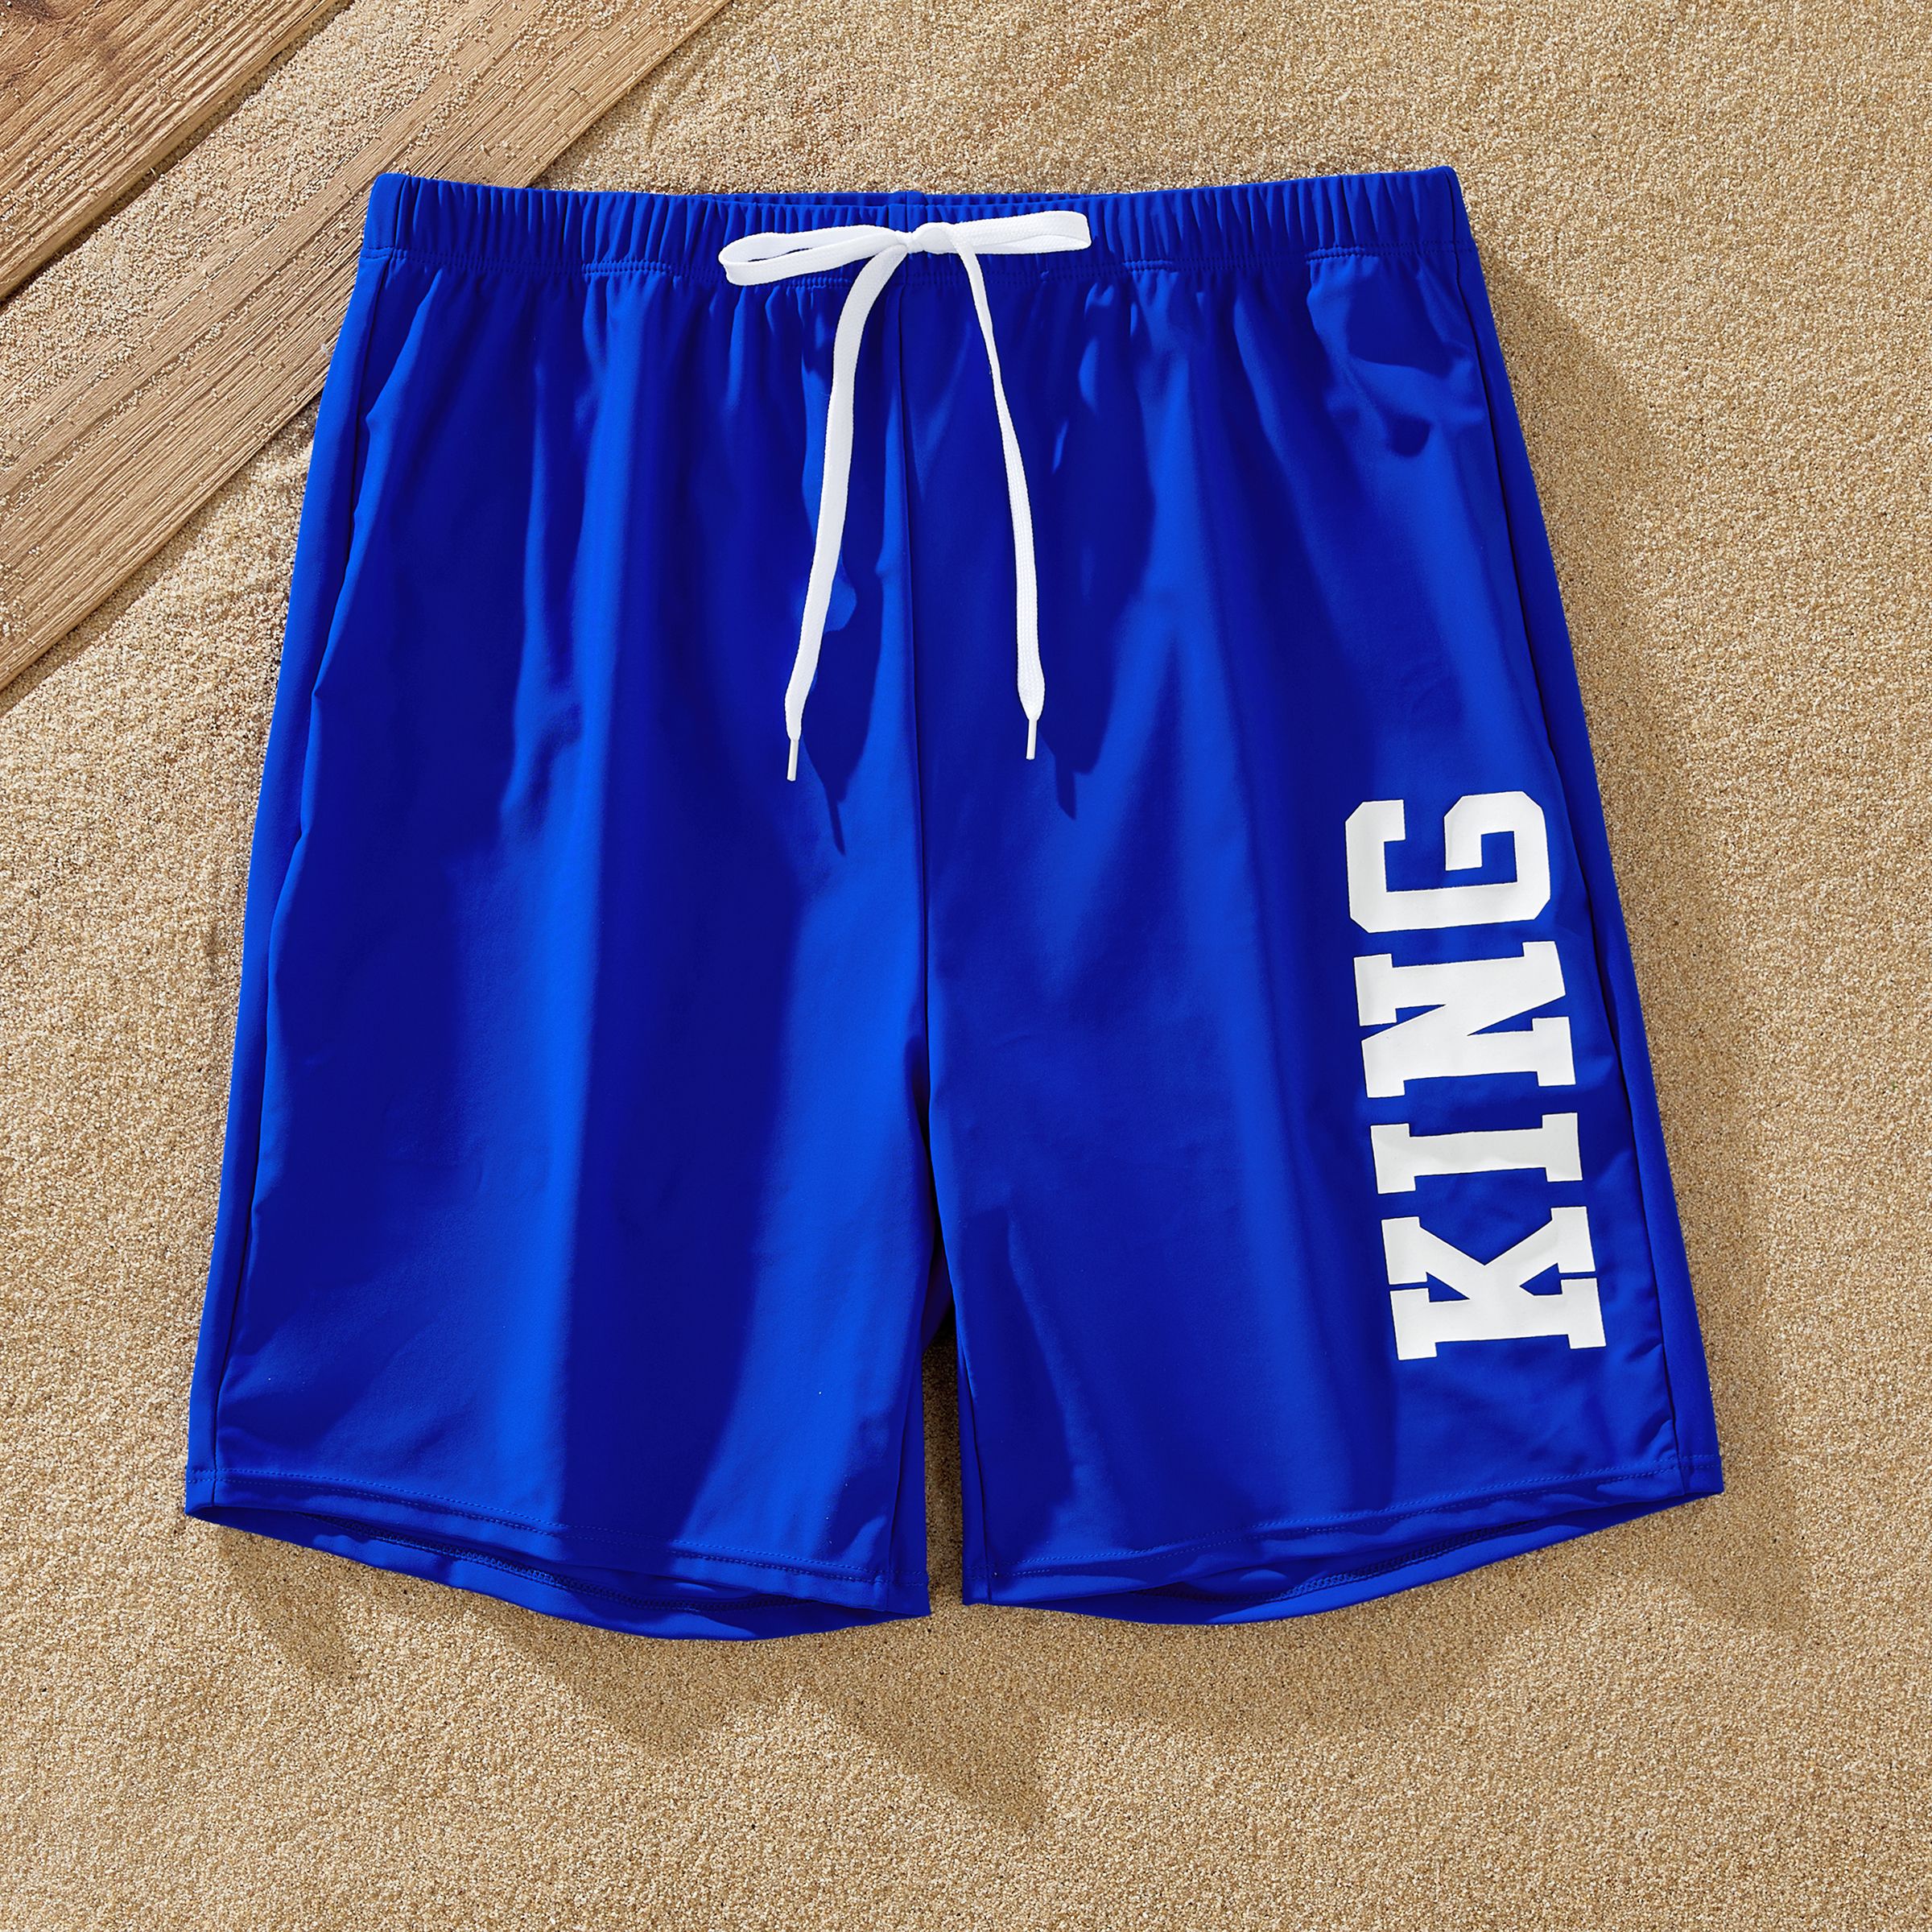 Family Matching Blue Ruffle Trim Two-piece Swimsuit and Letter Print Swim Trunks